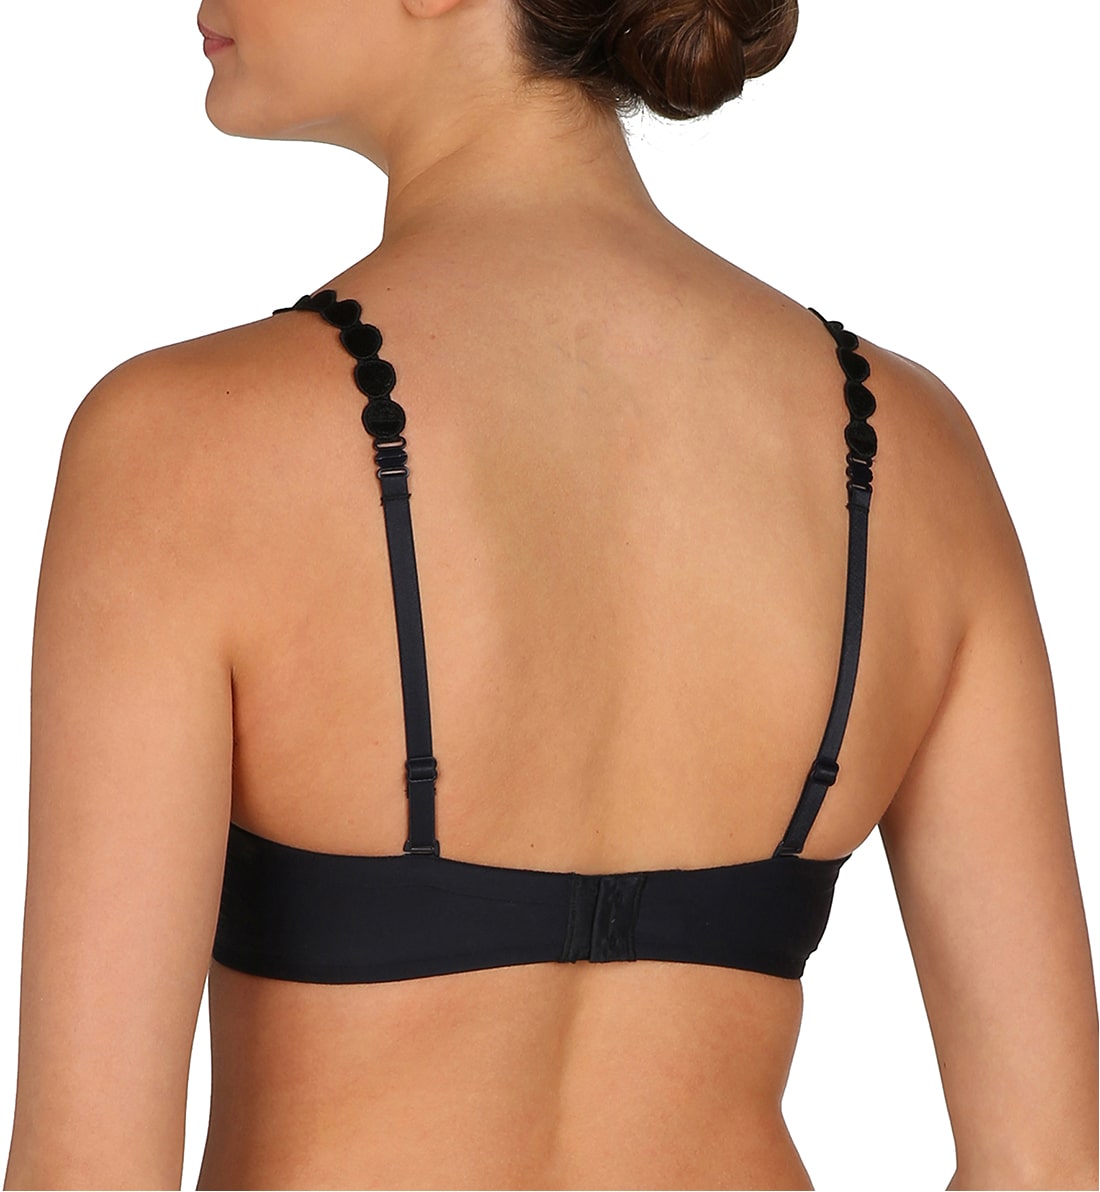 Marie Jo Tom Convertible Seamless Underwire Bra (0120826),30C,Charcoal - Charcoal,30C